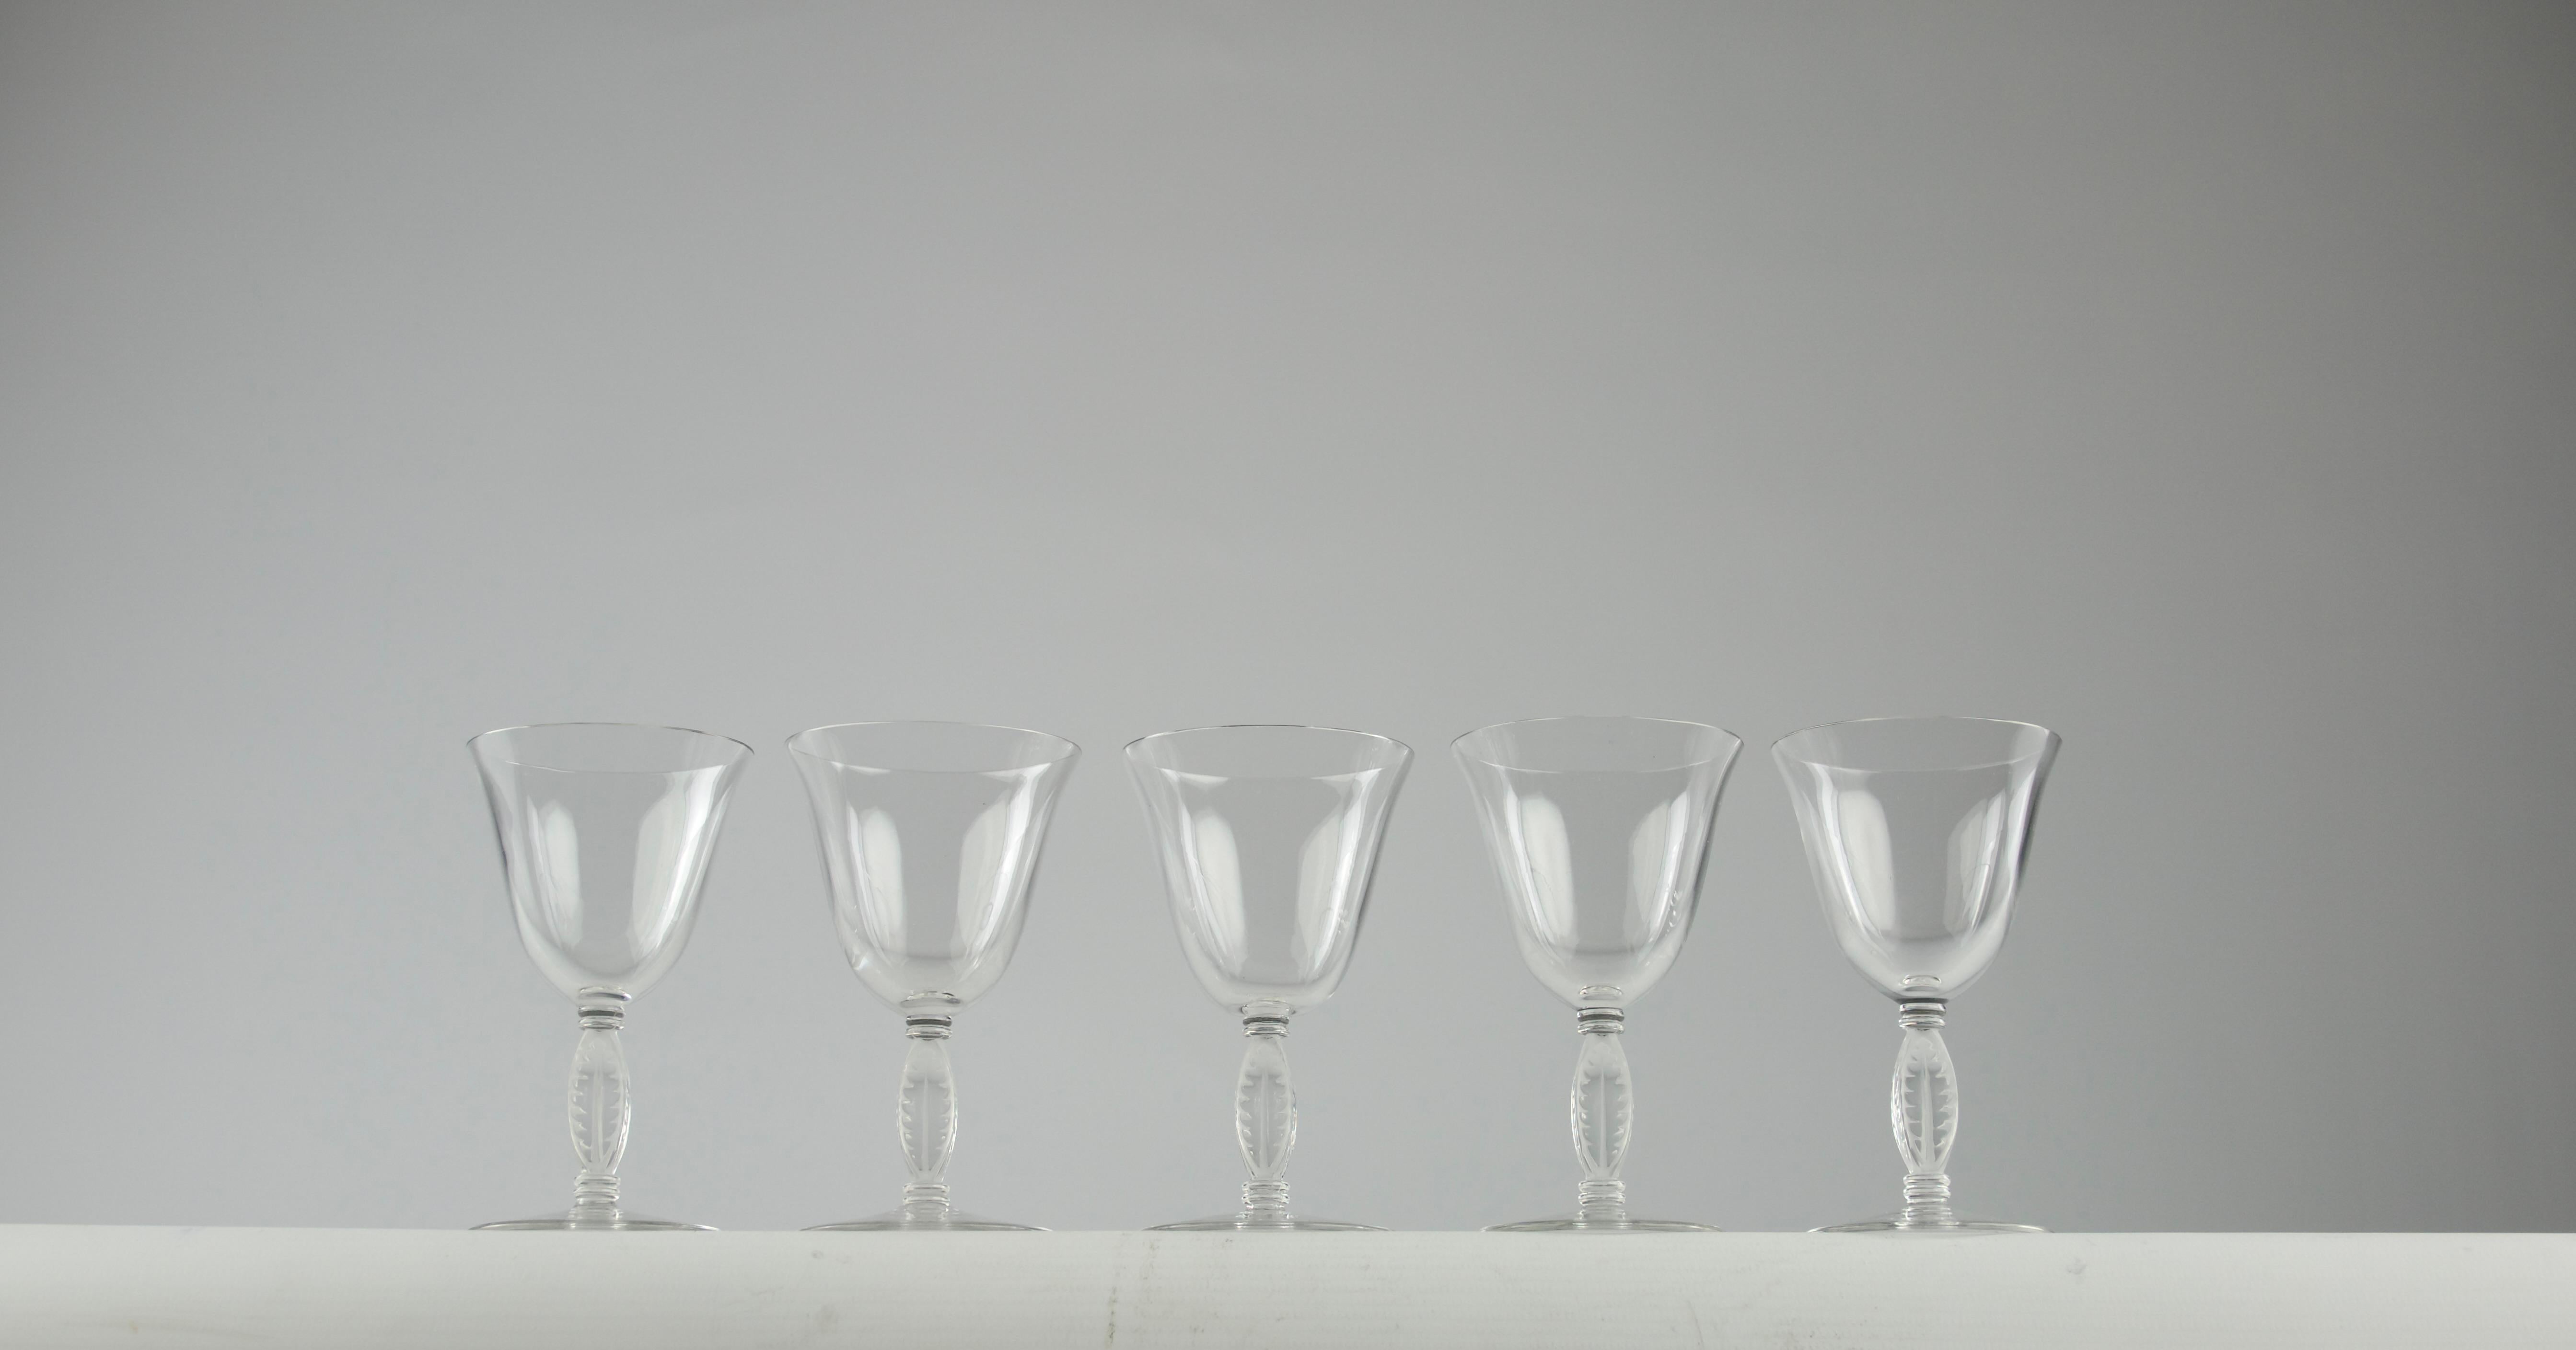 Beautiful Lalique Fontainebleau set of five liquor glasses. Other wine glasses from the same collection are available in the shop.

In very good condition.

Dimensions in cm ( H x D ) : 11 x 6.5

Secure shipping.

First designed by Rene Lalique in